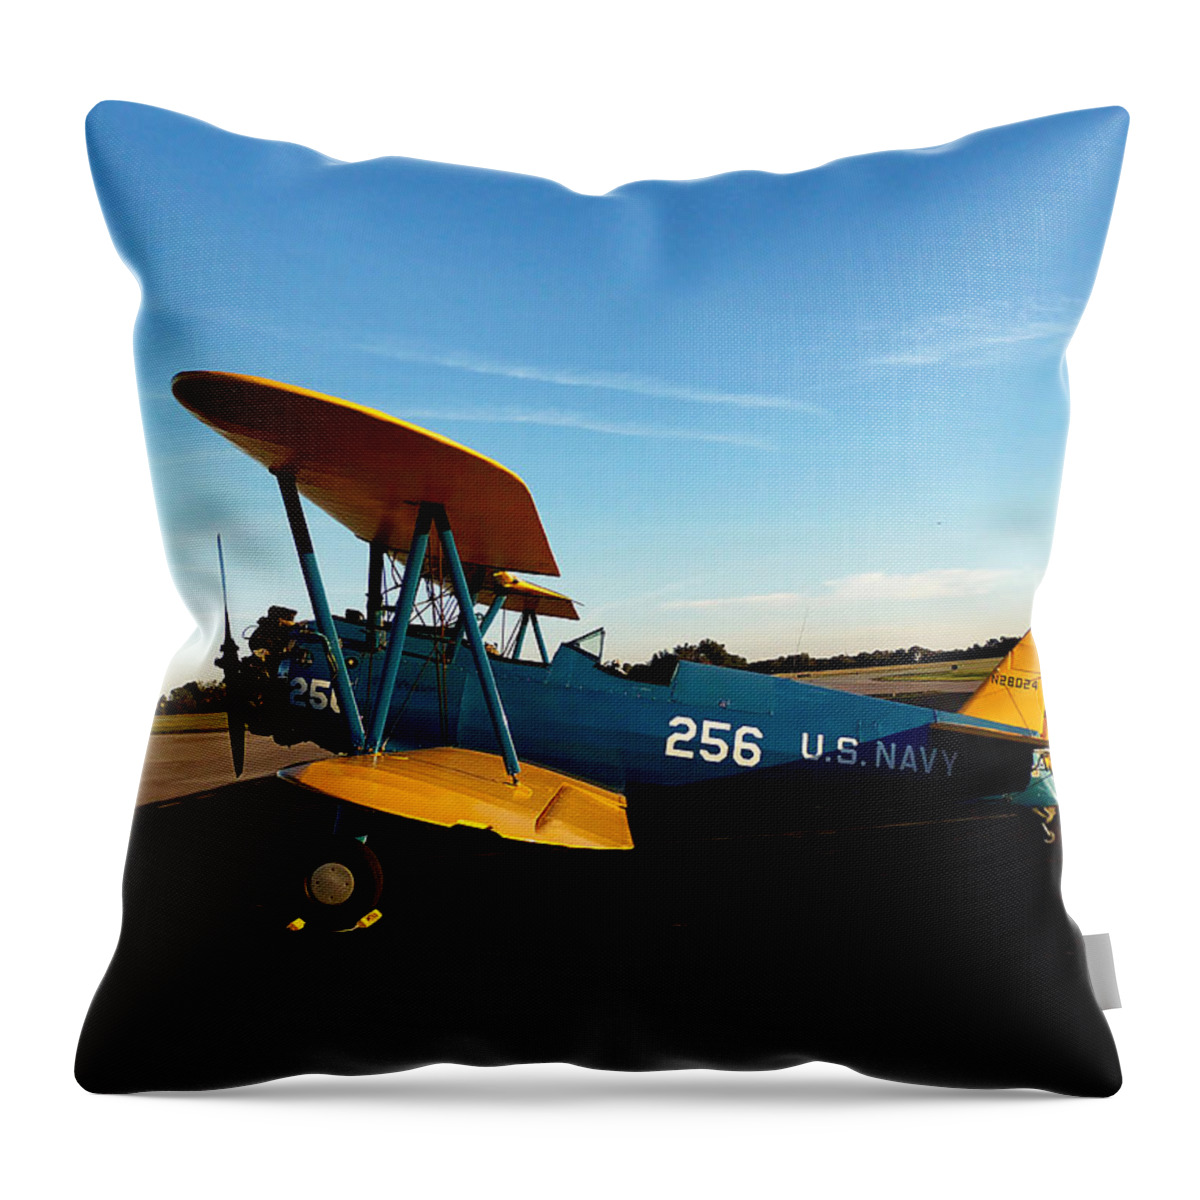 Airplane Throw Pillow featuring the photograph Preston's Stearman 007 by Christopher Mercer